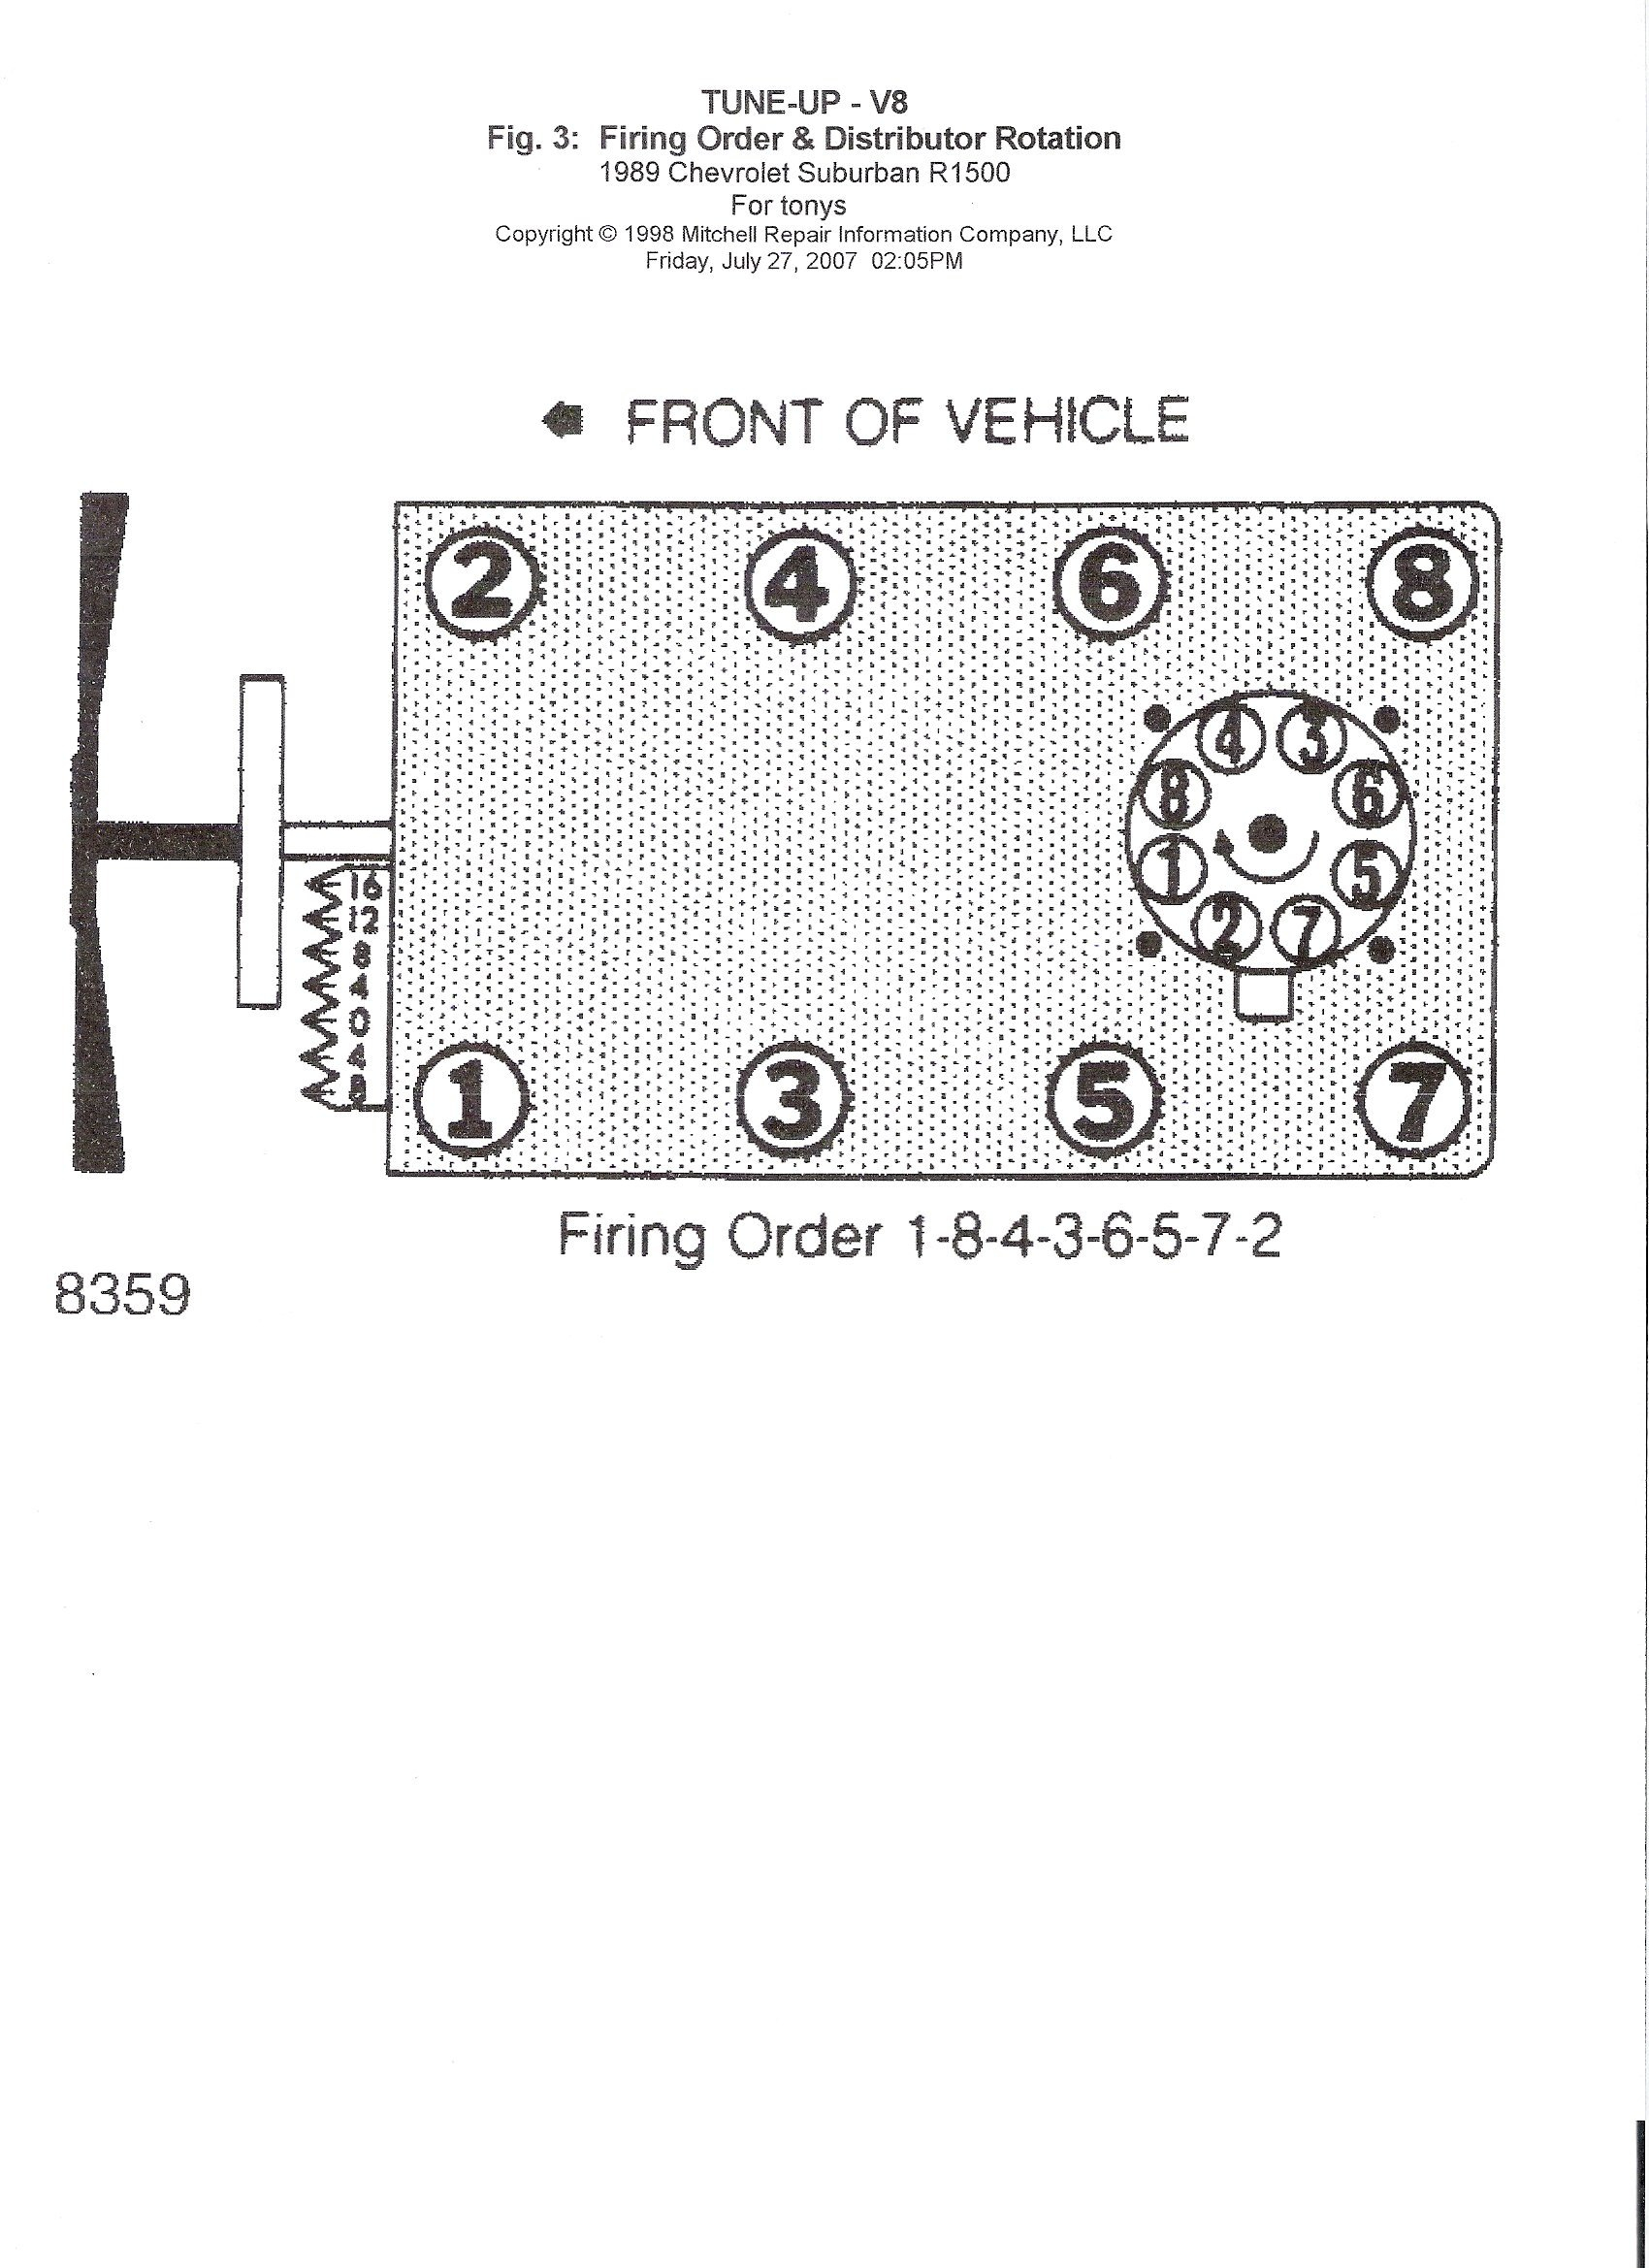 1997 Ford F150 4.6 L Firing Order | Wiring and Printable